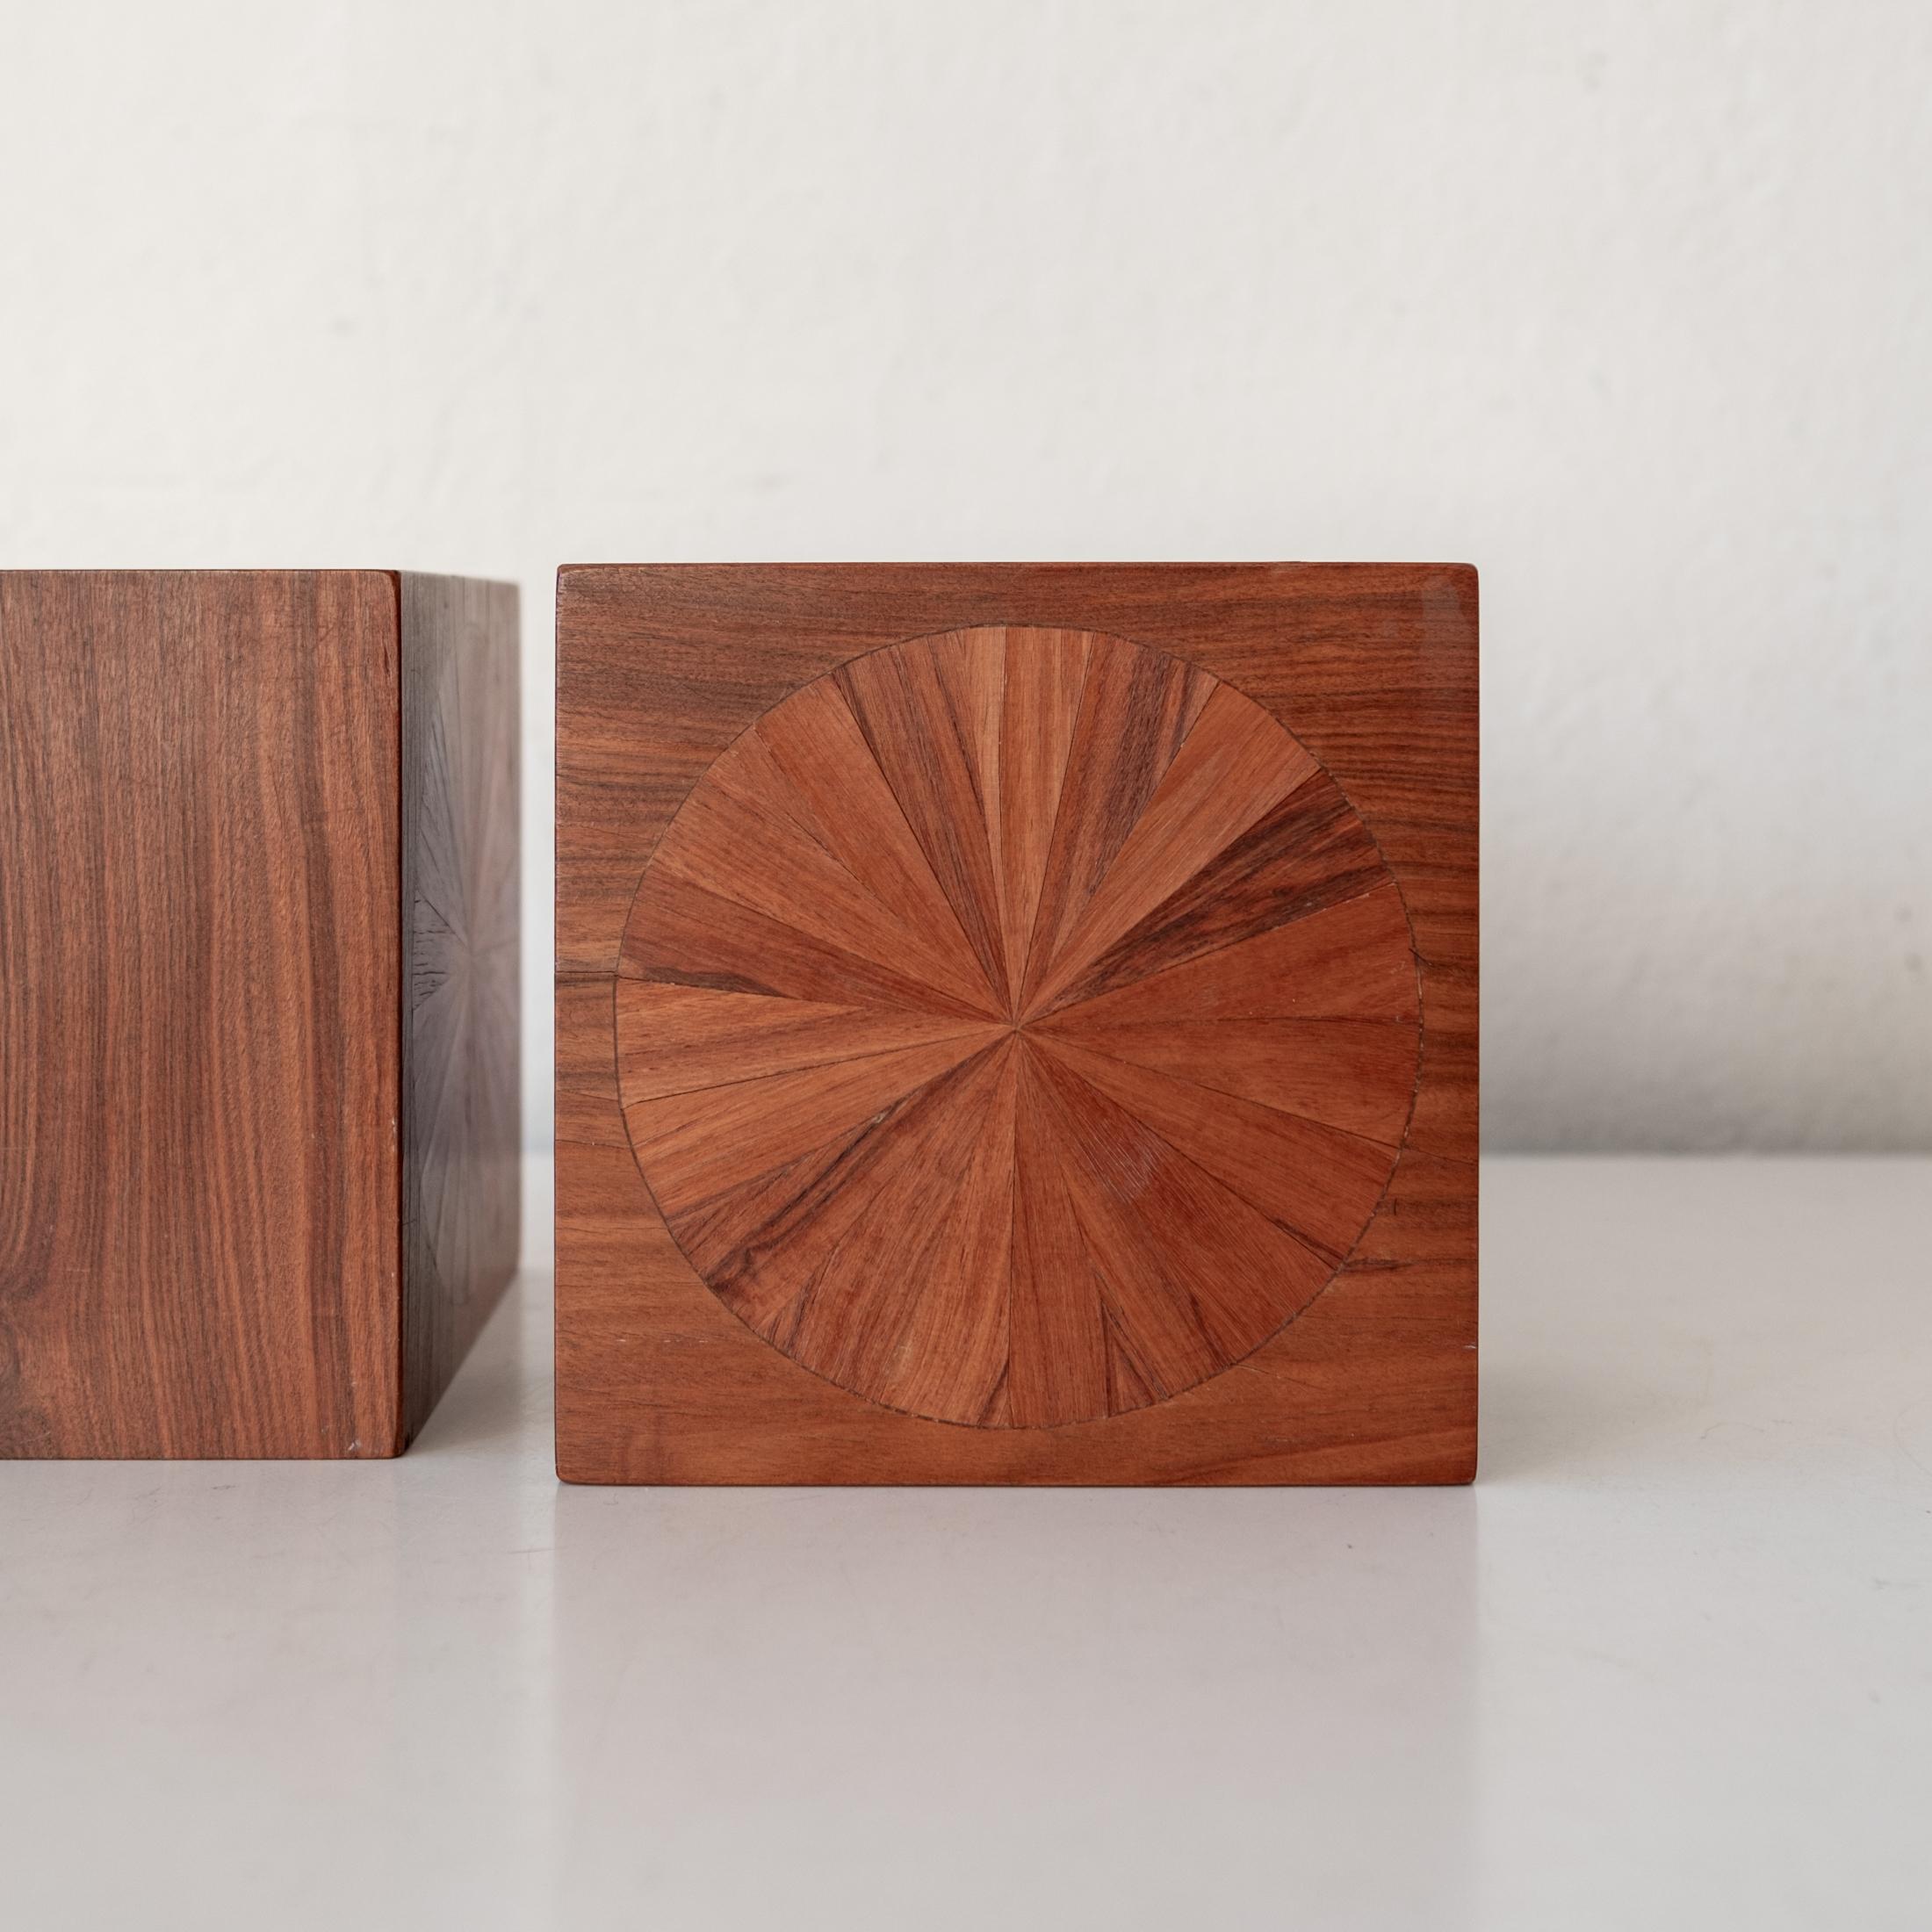 Late 20th Century Studio Crafted Wood Marquetry Bookends by Jere Osgood For Sale